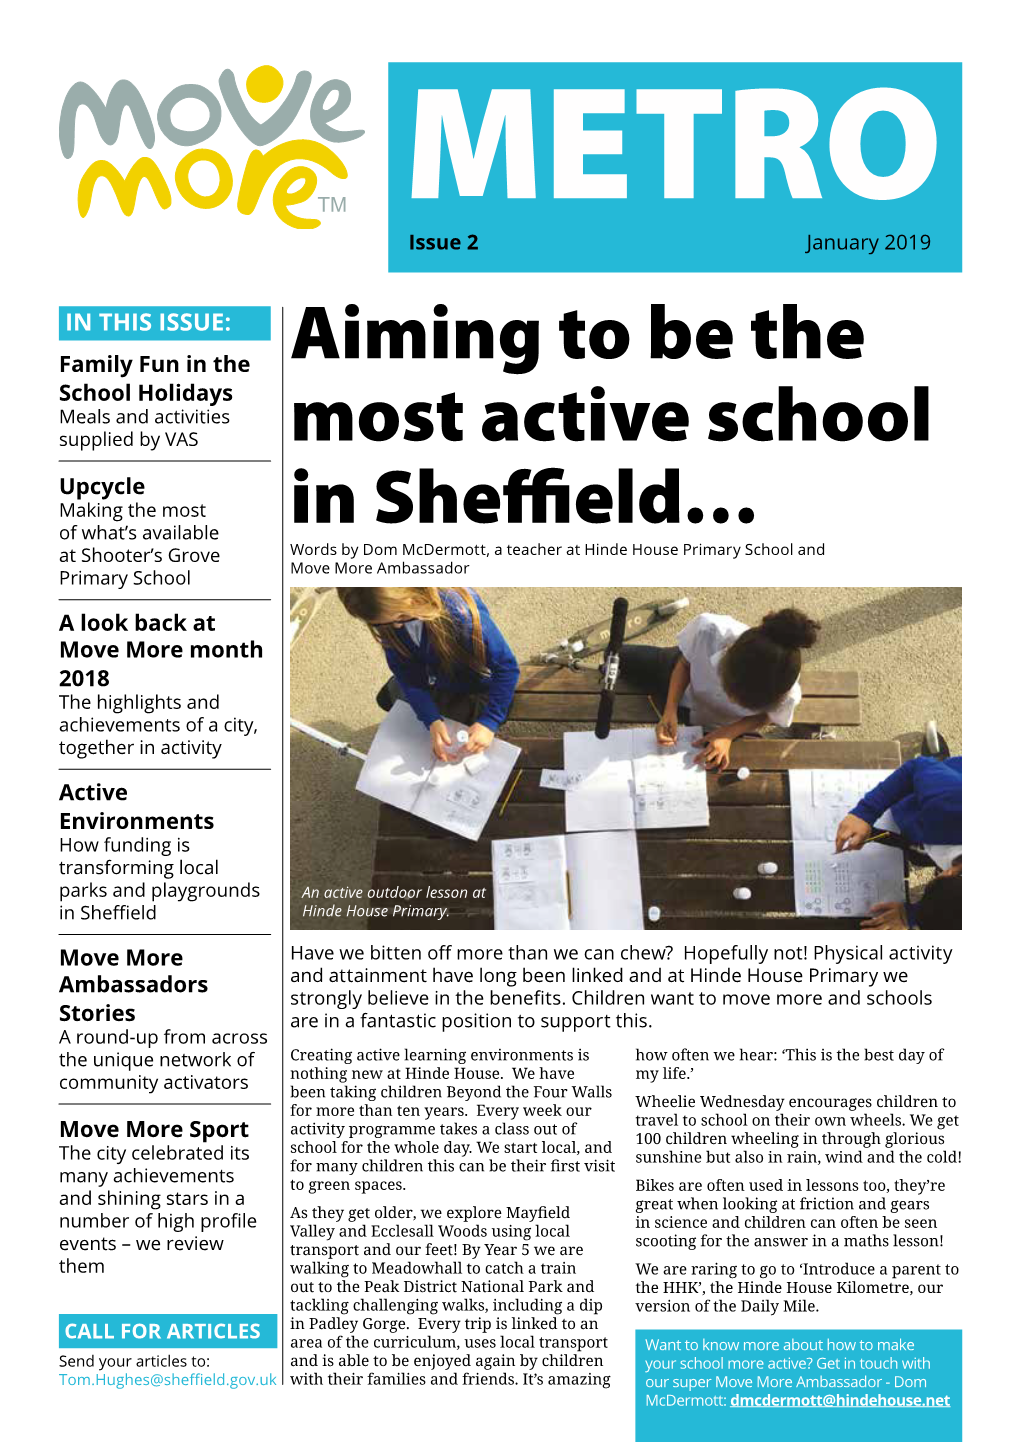 Aiming to Be the Most Active School in Sheffield…